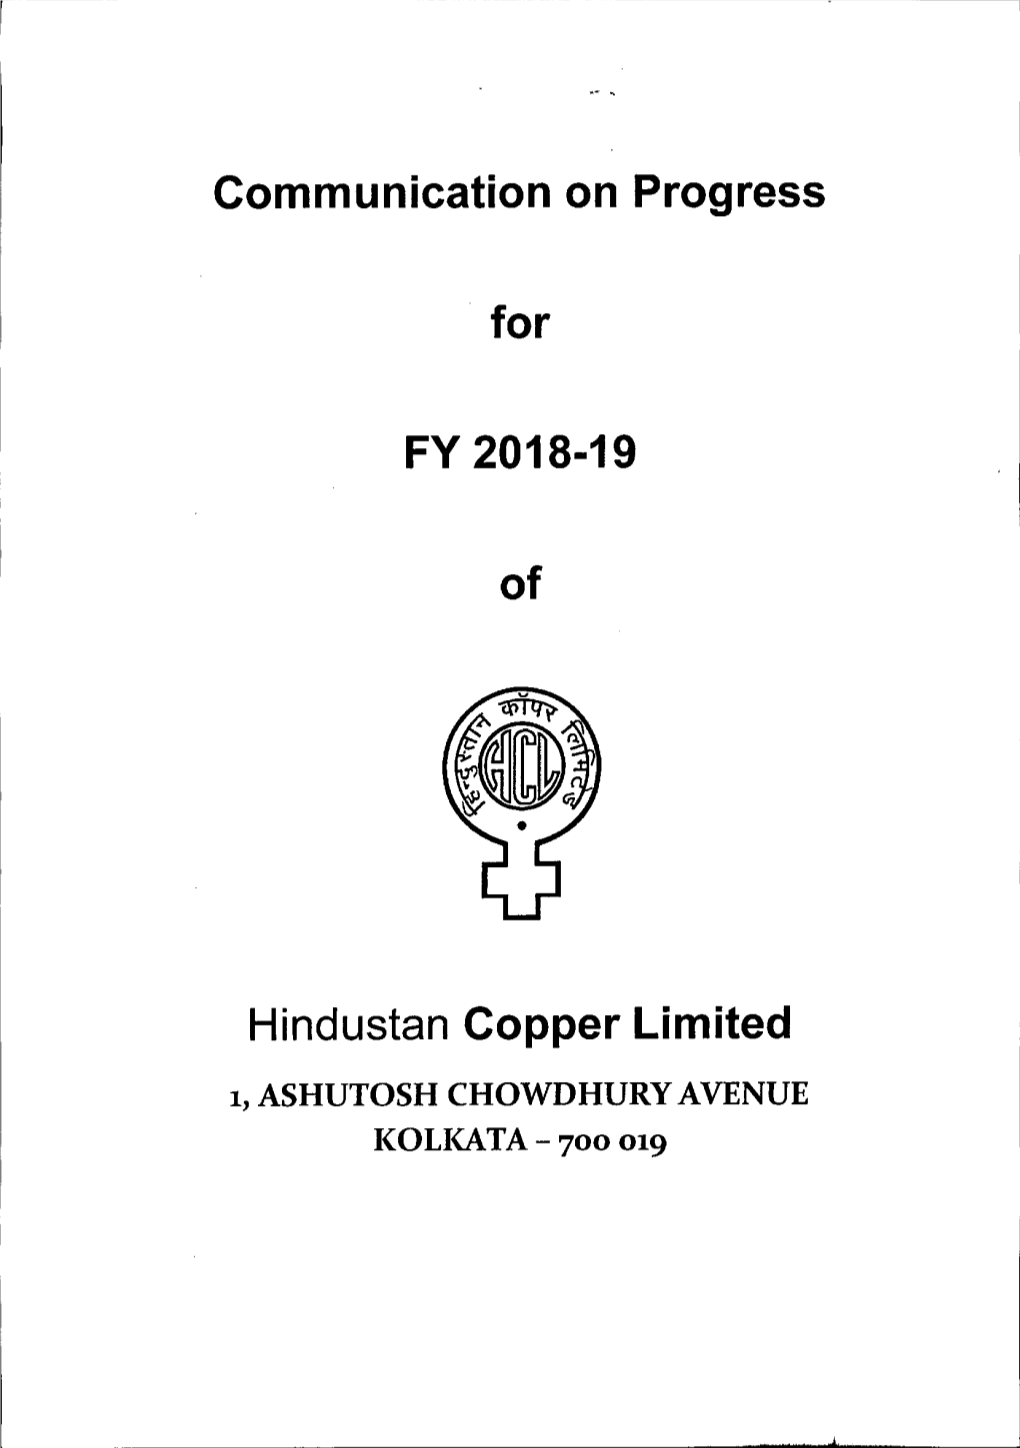 Communication on Progress for FY 2018-19 of Hindustan Copper Limited